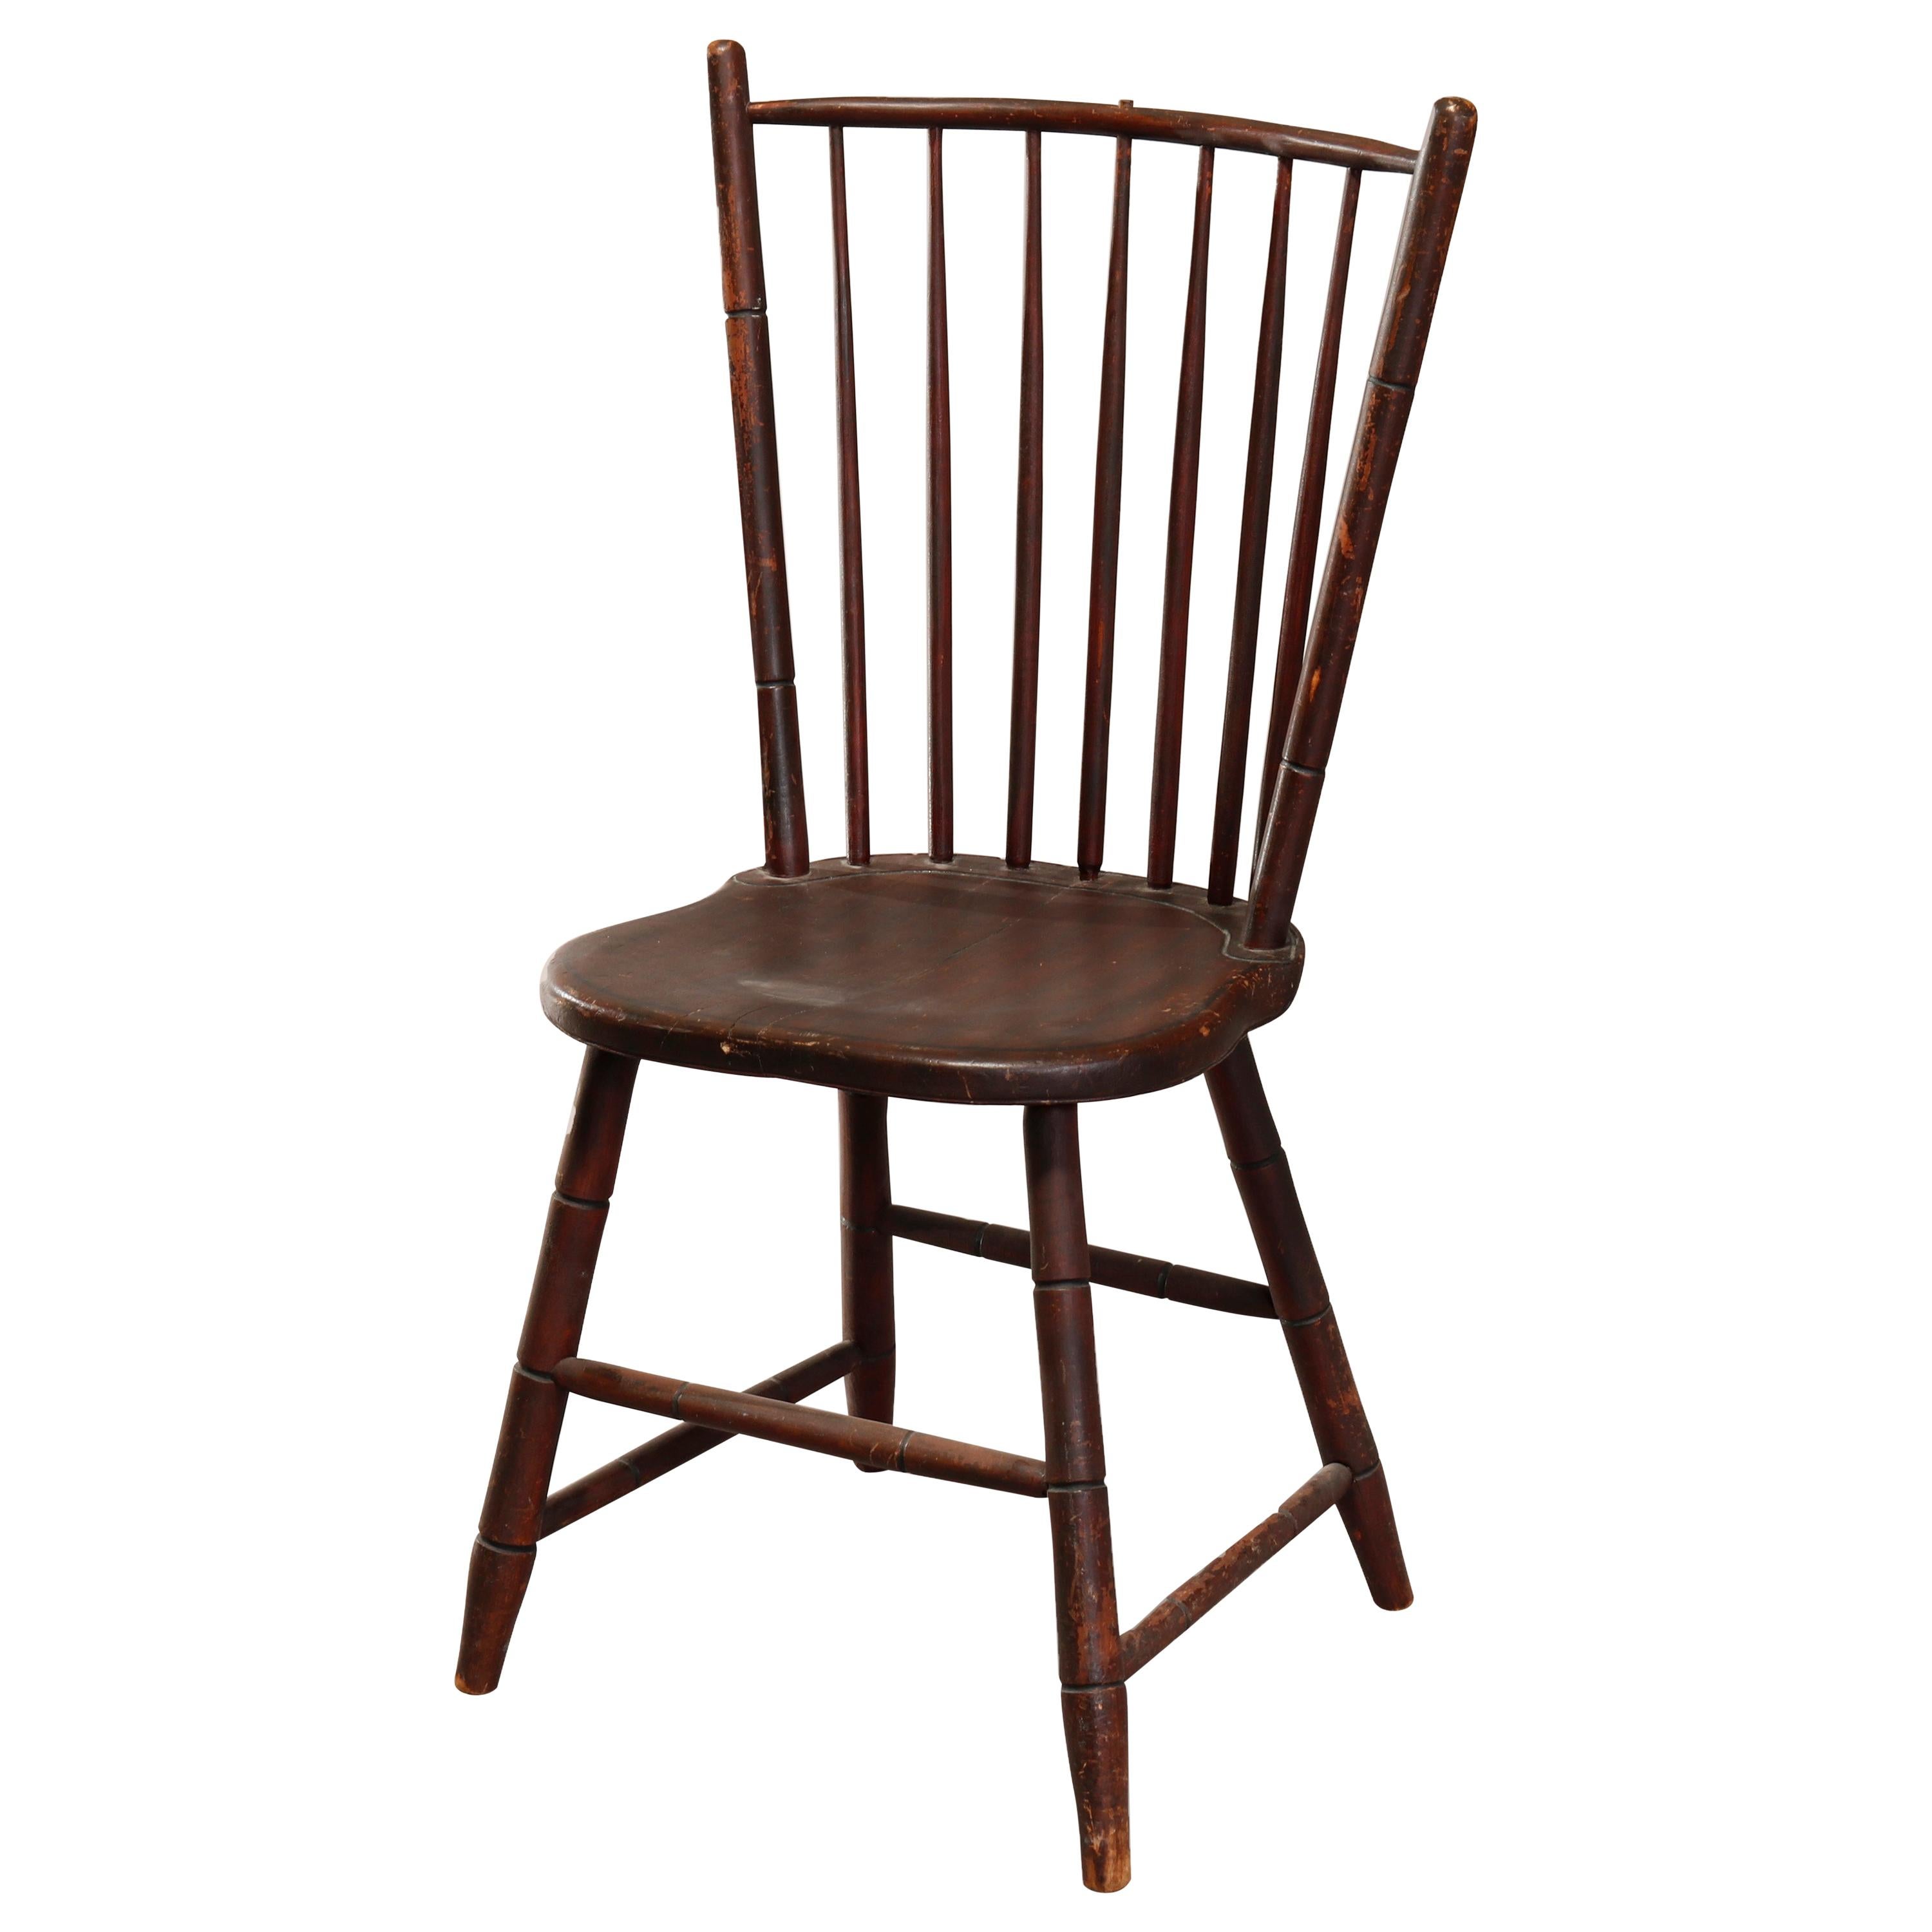 Antique Early American Stenciled Windsor Chair, 19th Century